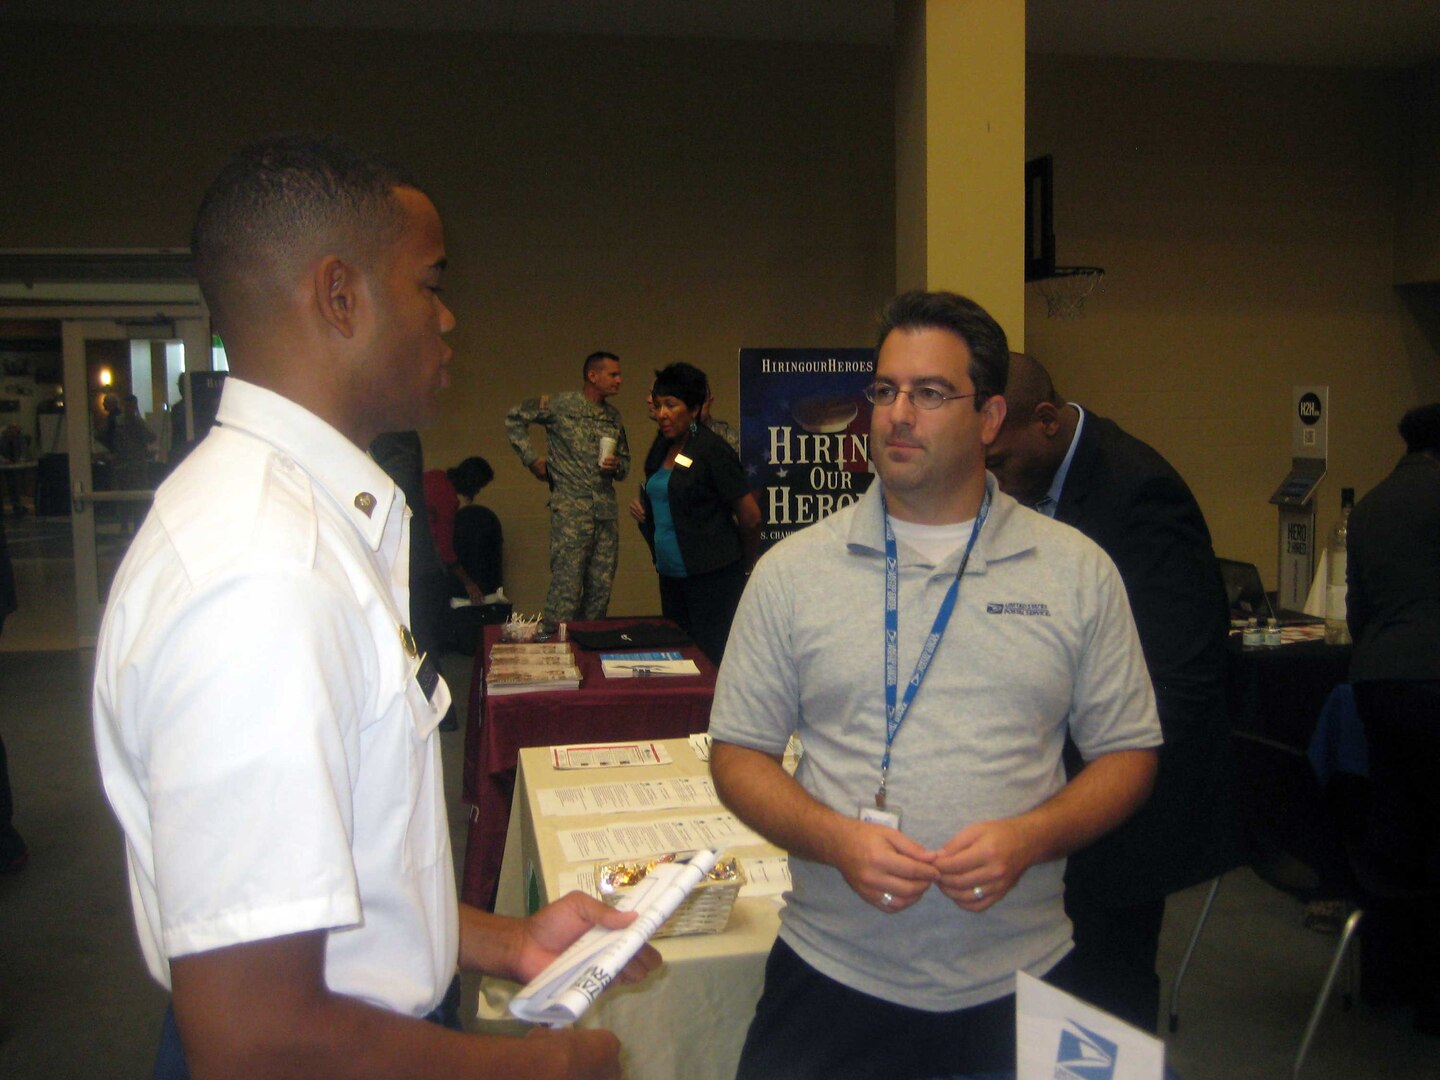 An Army Reserve soldier speaks with a recruiter during the Hire Our Heroes job fair the New York National Guard hosted at the Farmingdale Armed Forces Reserve Center on Aug. 14, 2013.